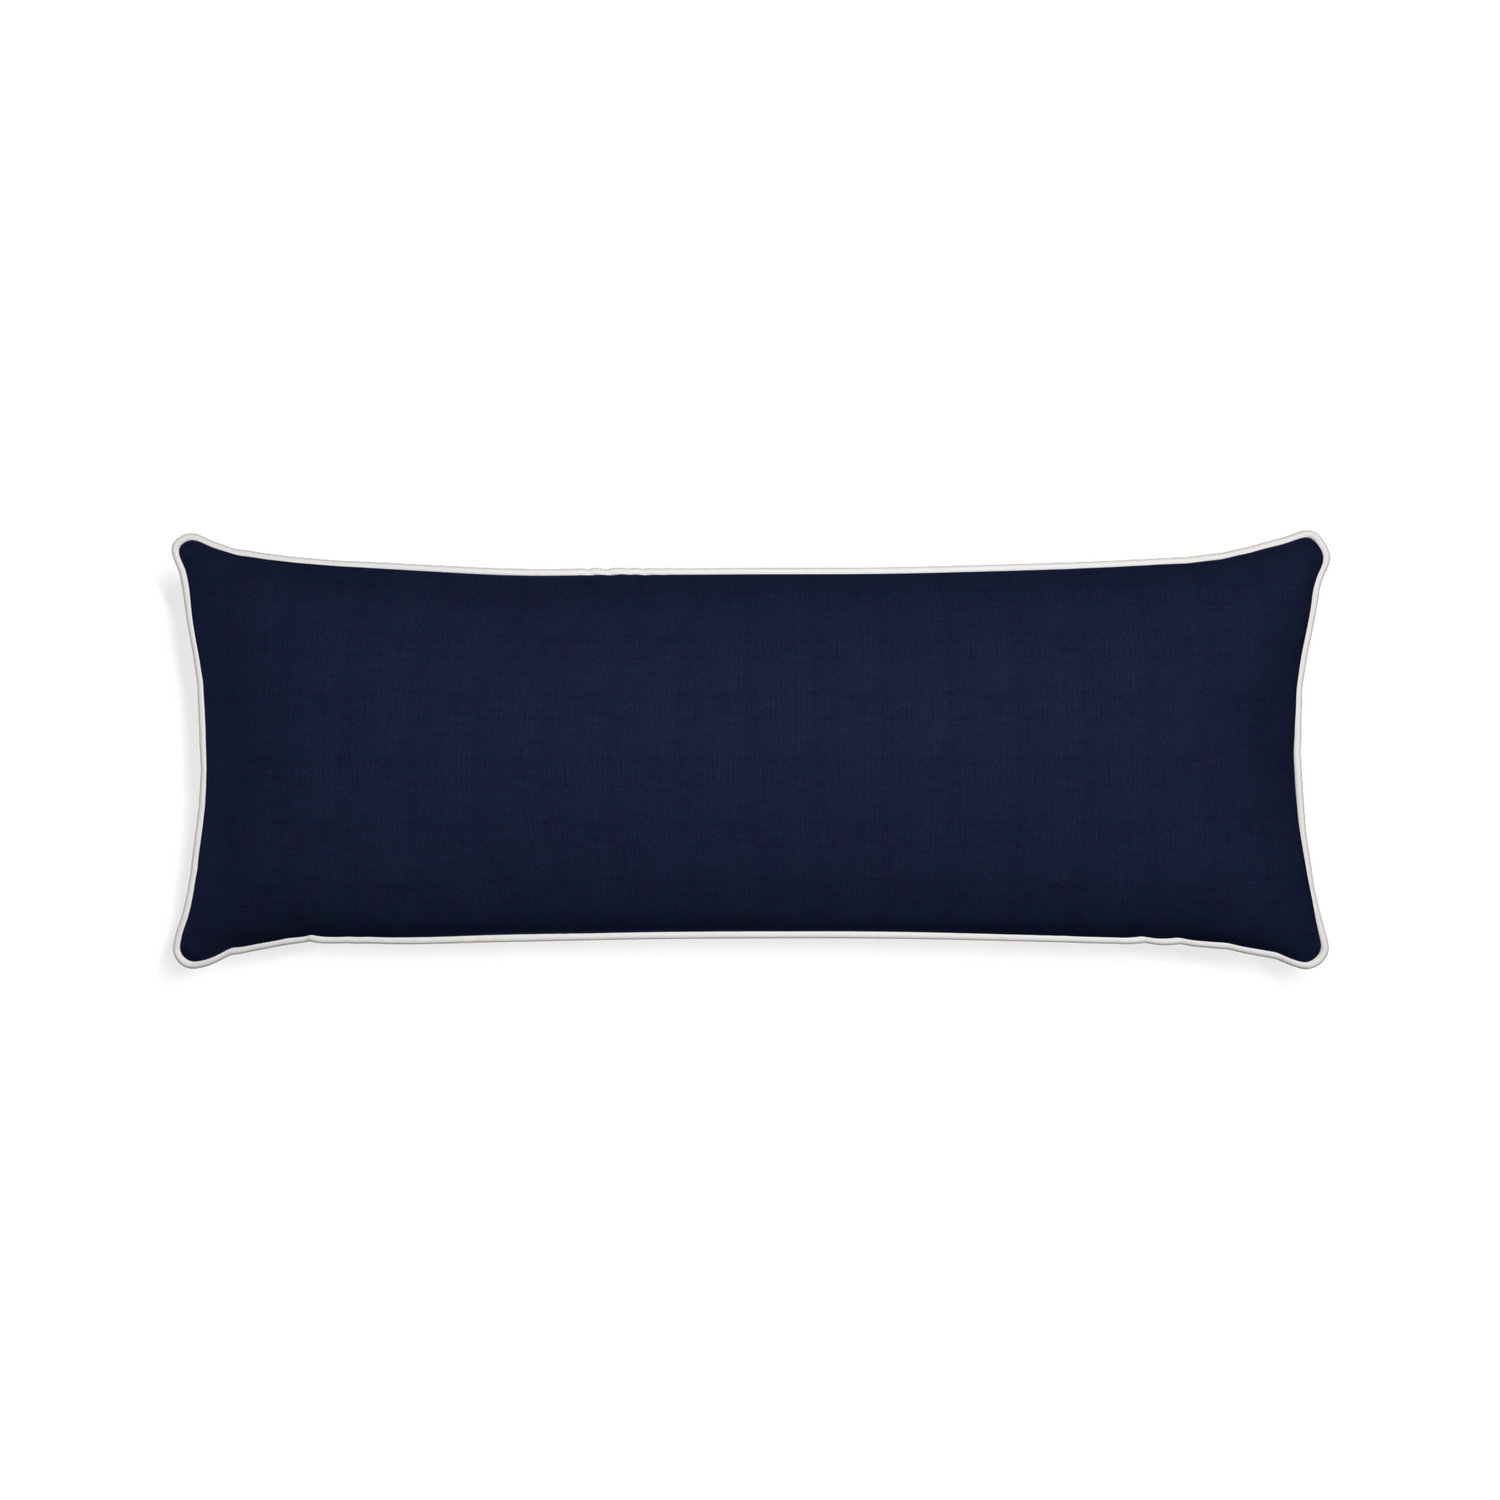 Xl-lumbar midnight custom pillow with snow piping on white background